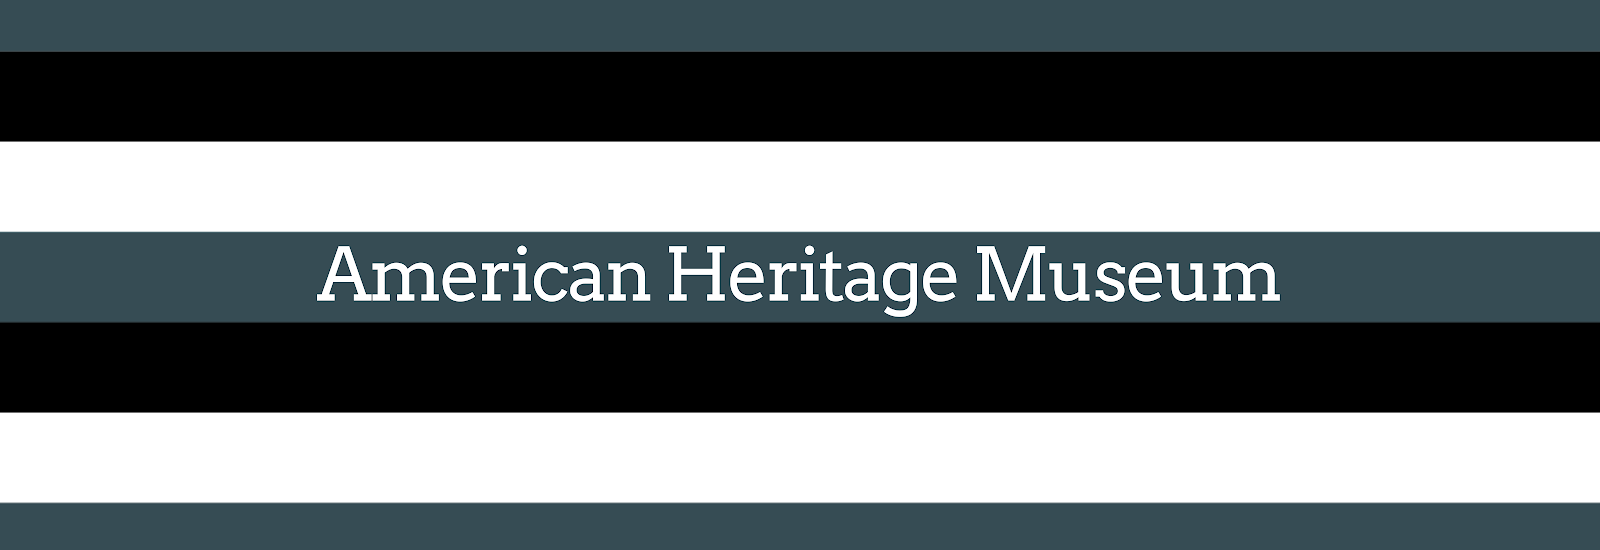 A black, white, and dark blue striped header image reading American Heritage Museum